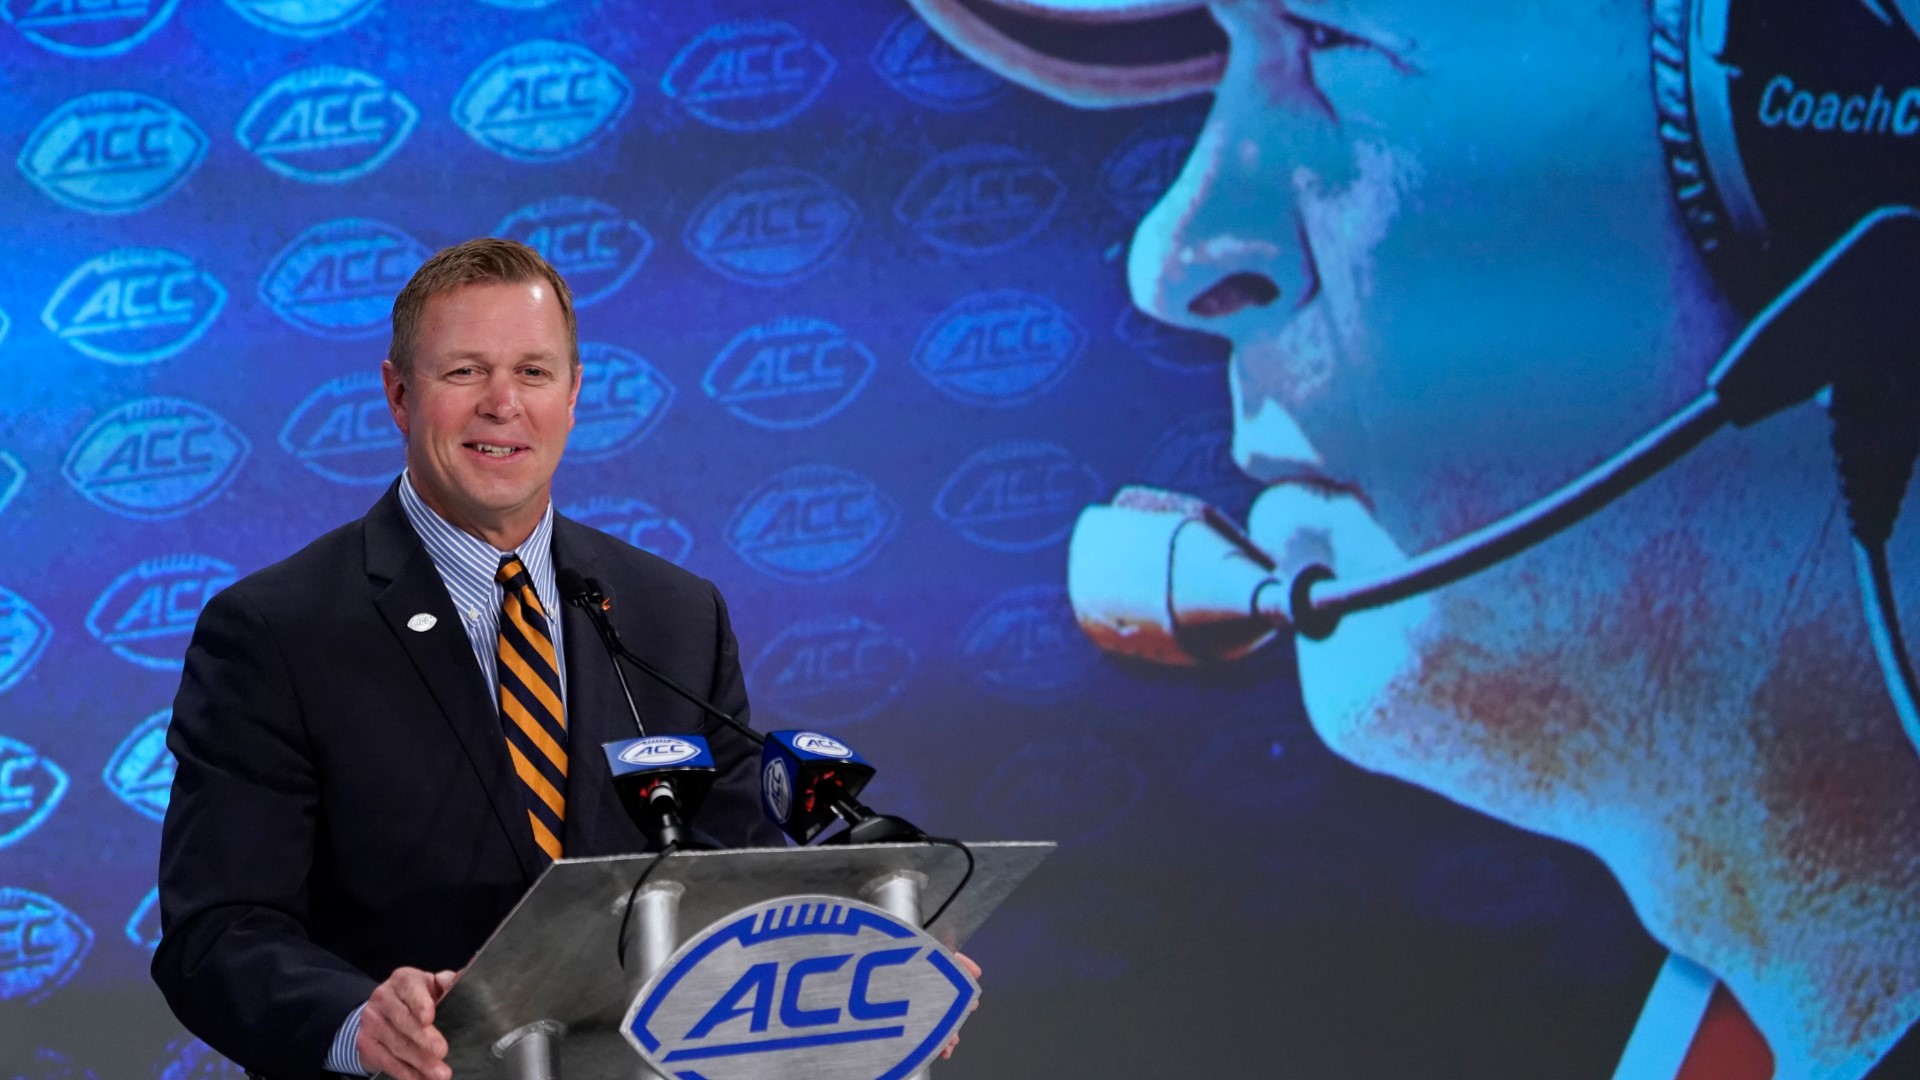 UVA football is hoping to continue their upward trend. They took center stage at ACC media days.